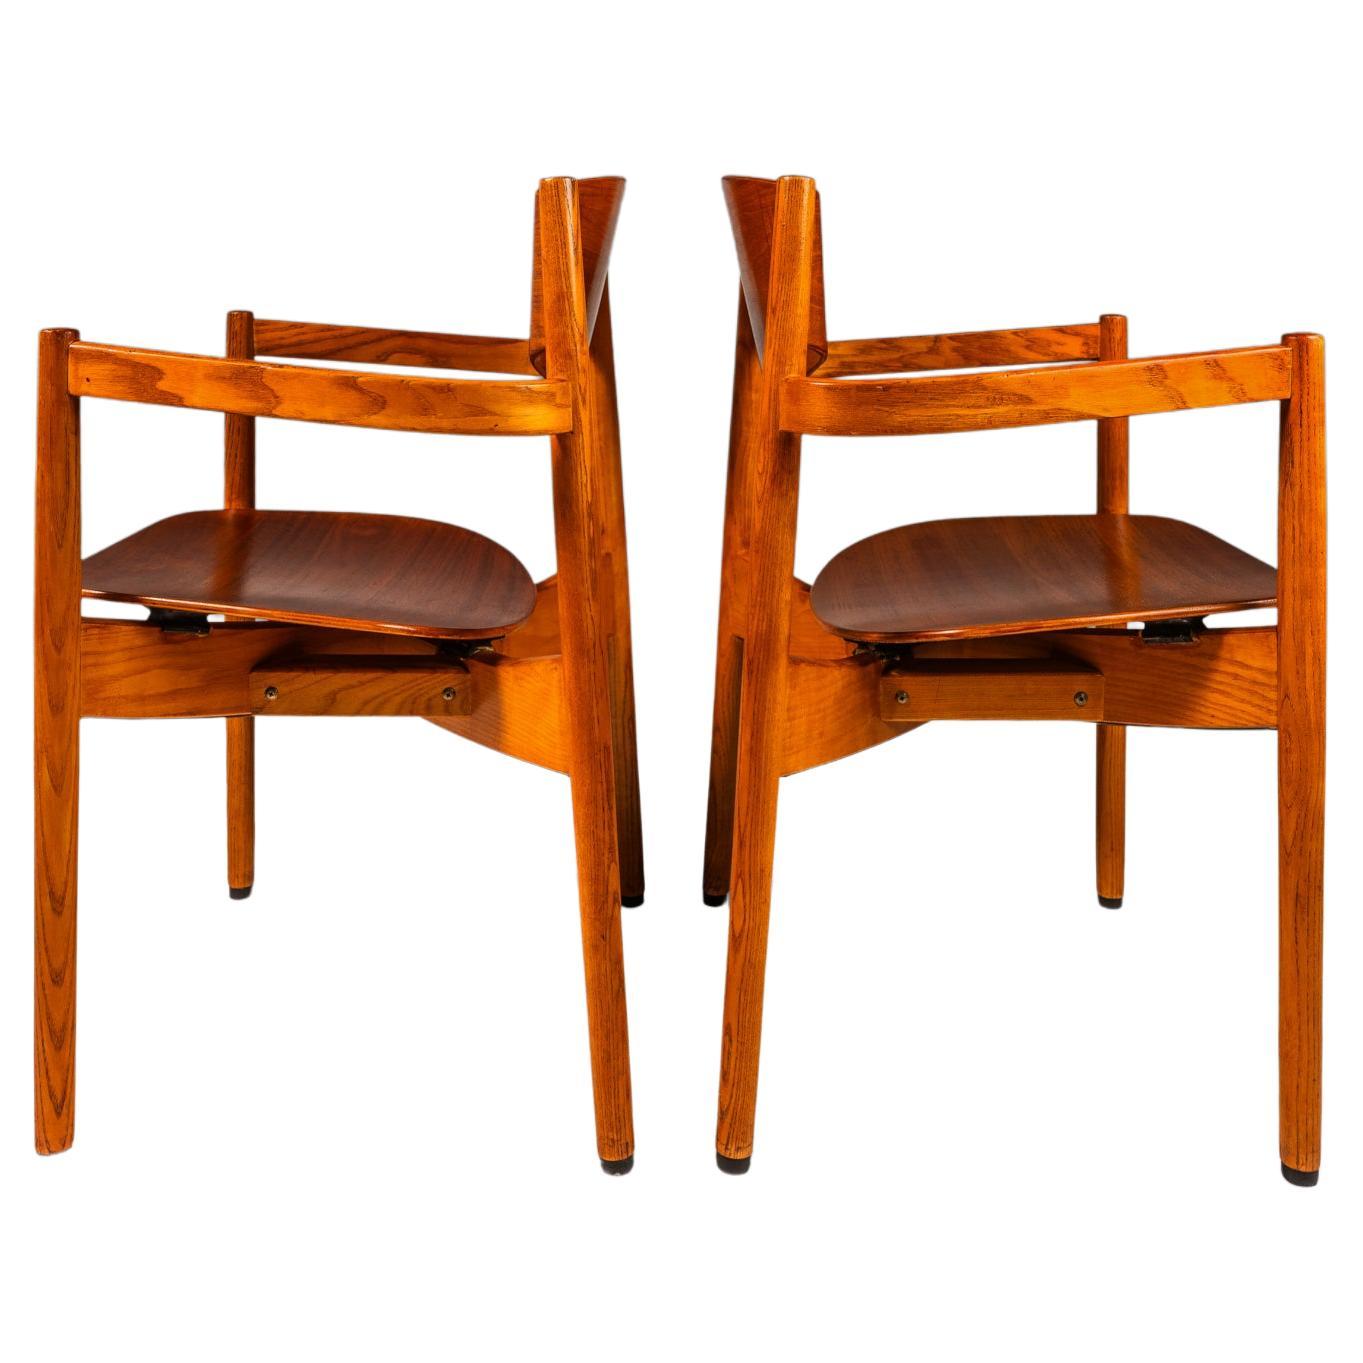 Set of 2 Stacking in Oak & Walnut Chairs by Jens Risom, USA, c. 1960s For Sale